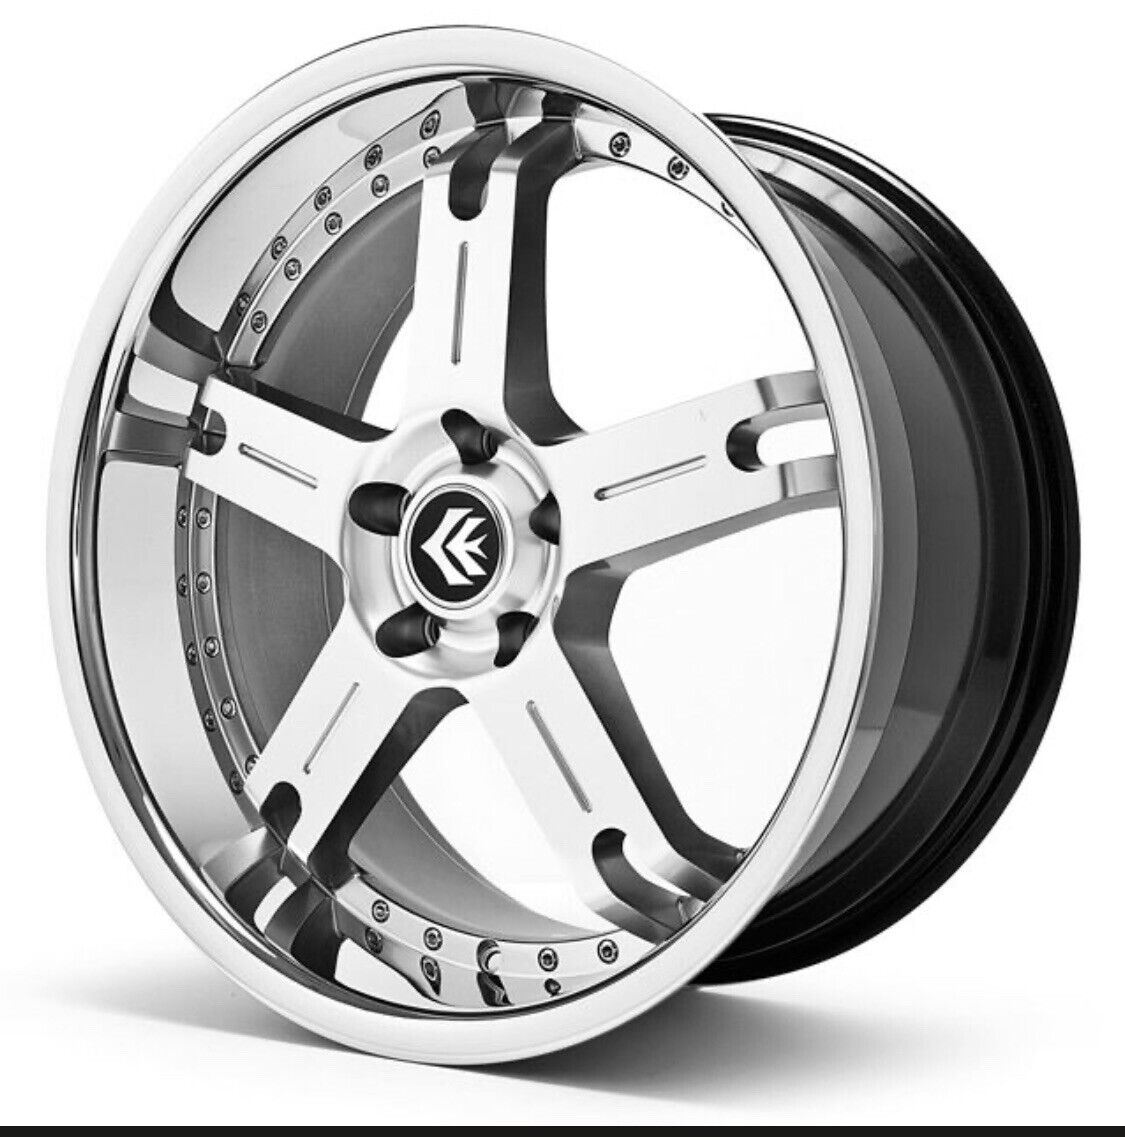 20” X8.5 20”x9.5 5 Lug 112 New Wheels Closeout Special 599.00 For The Set Of 4